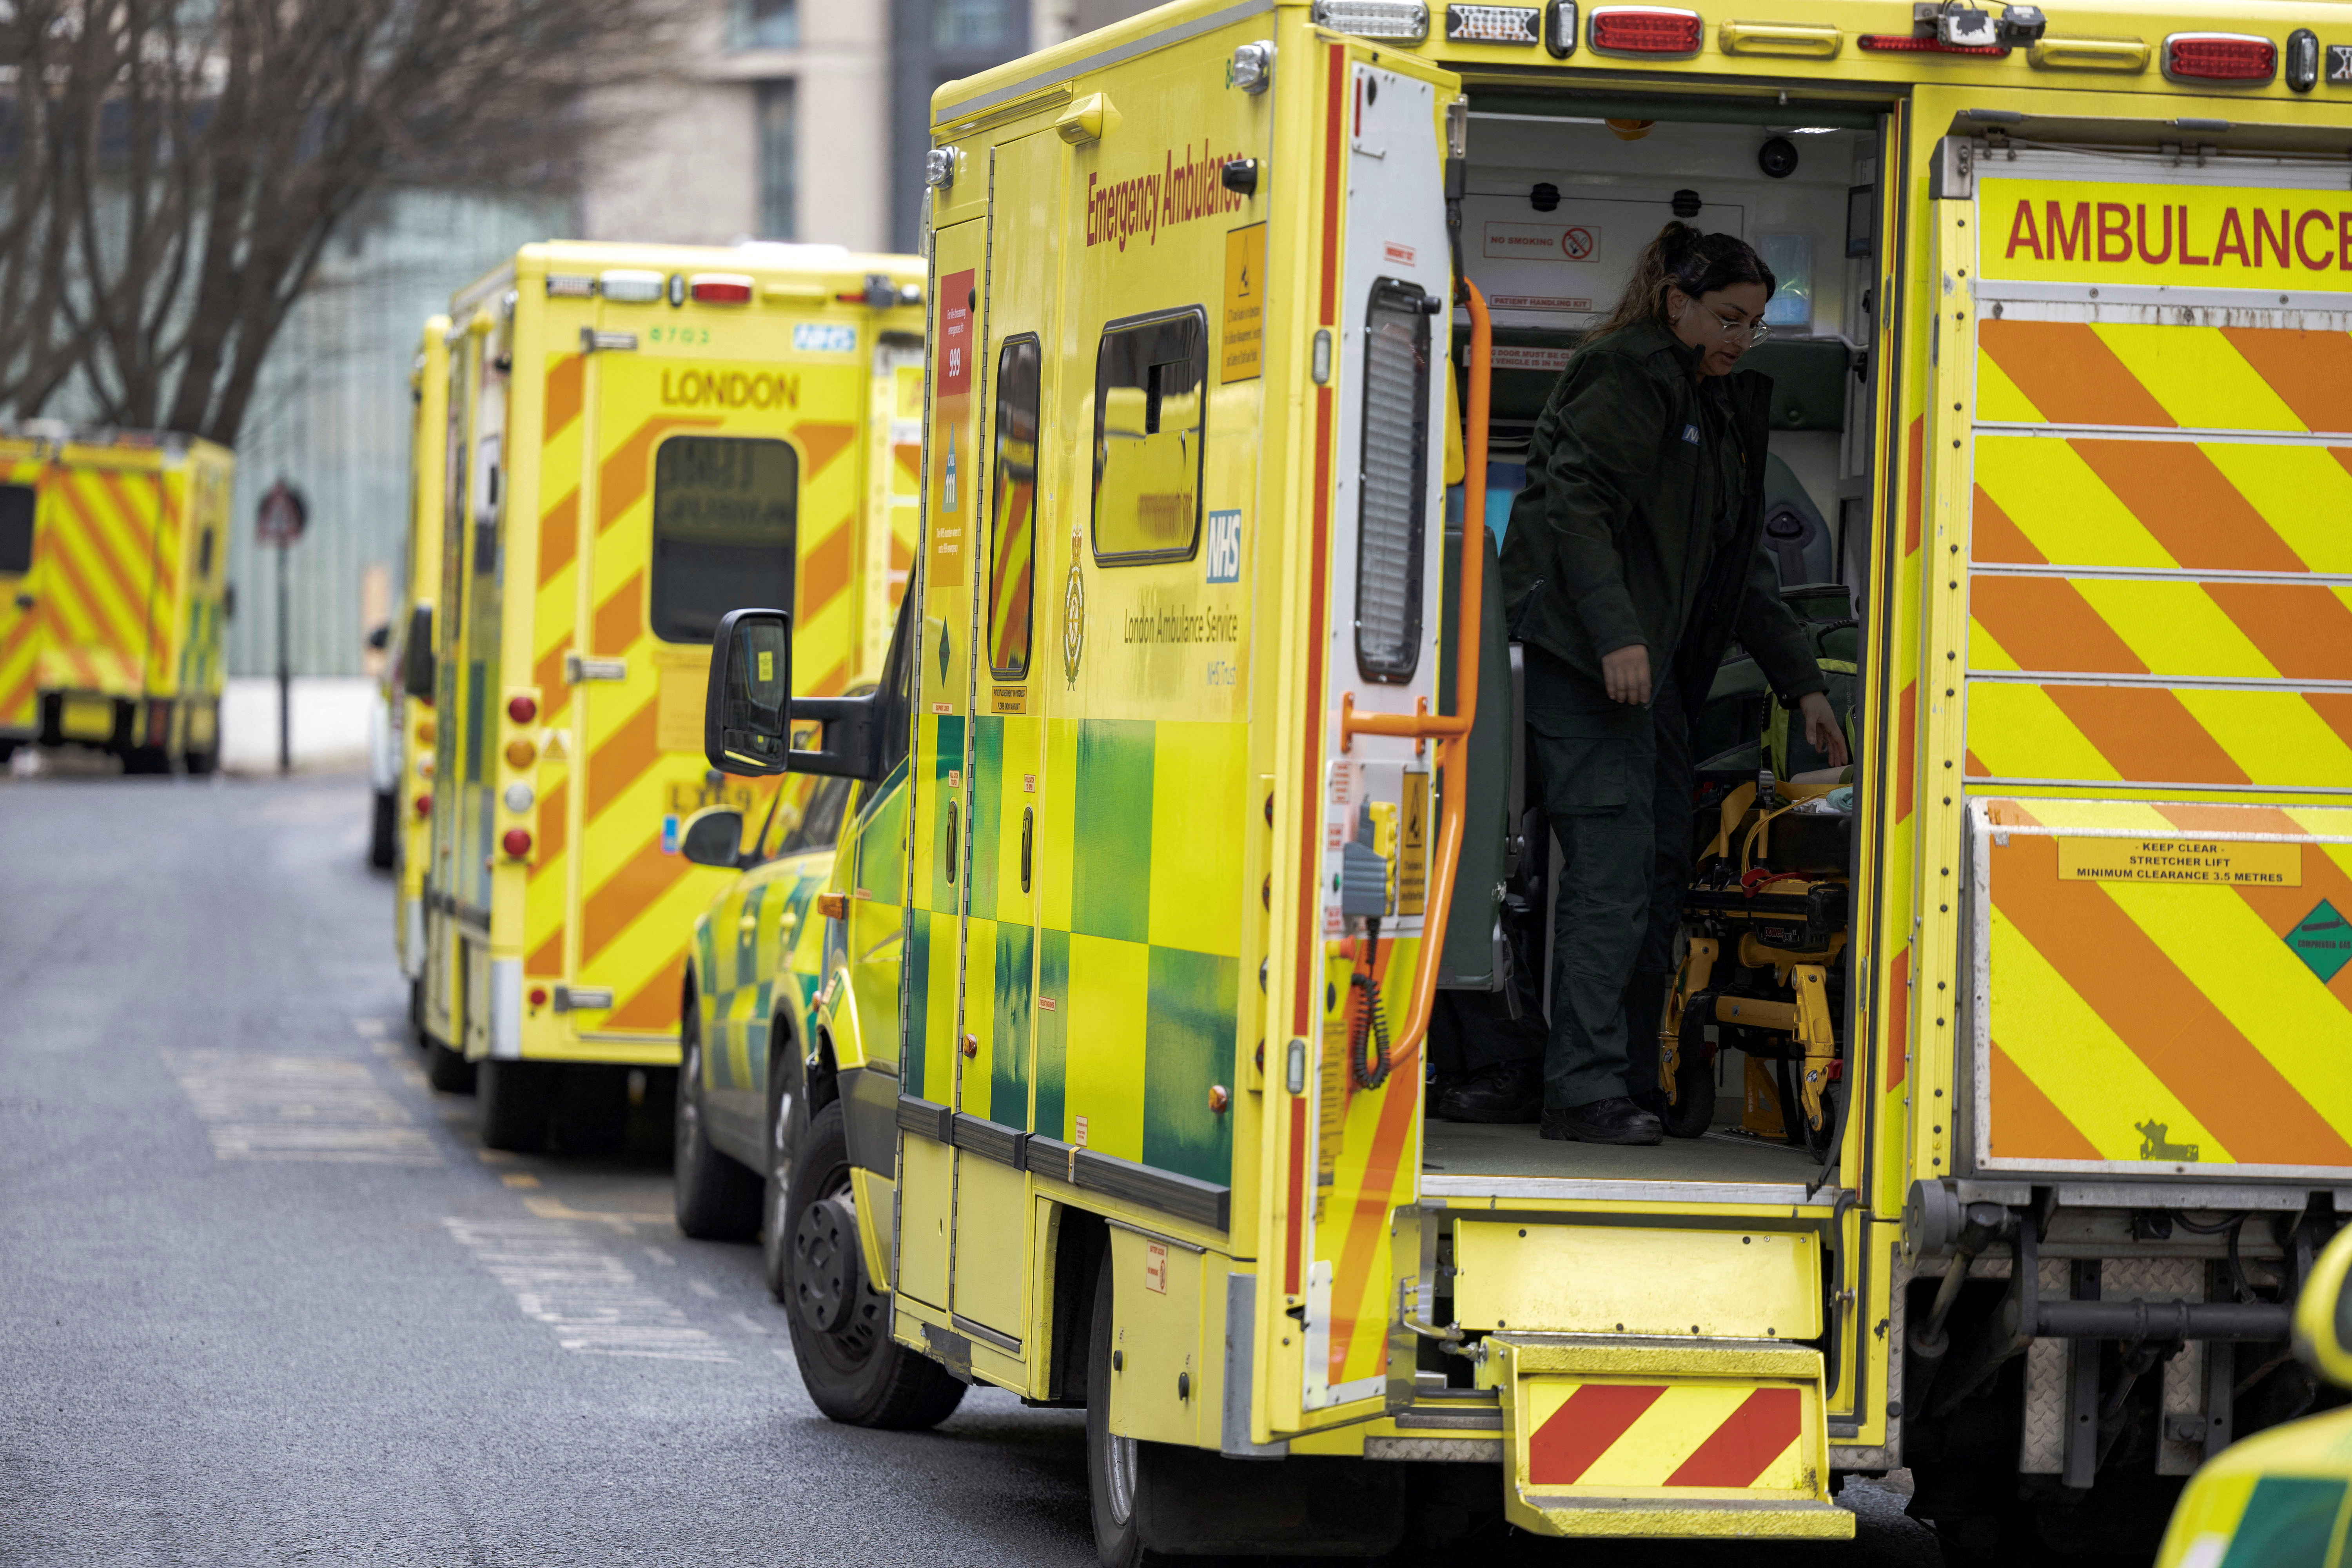 NHS dispute on ambulance services and other NHS organisations across most parts of England